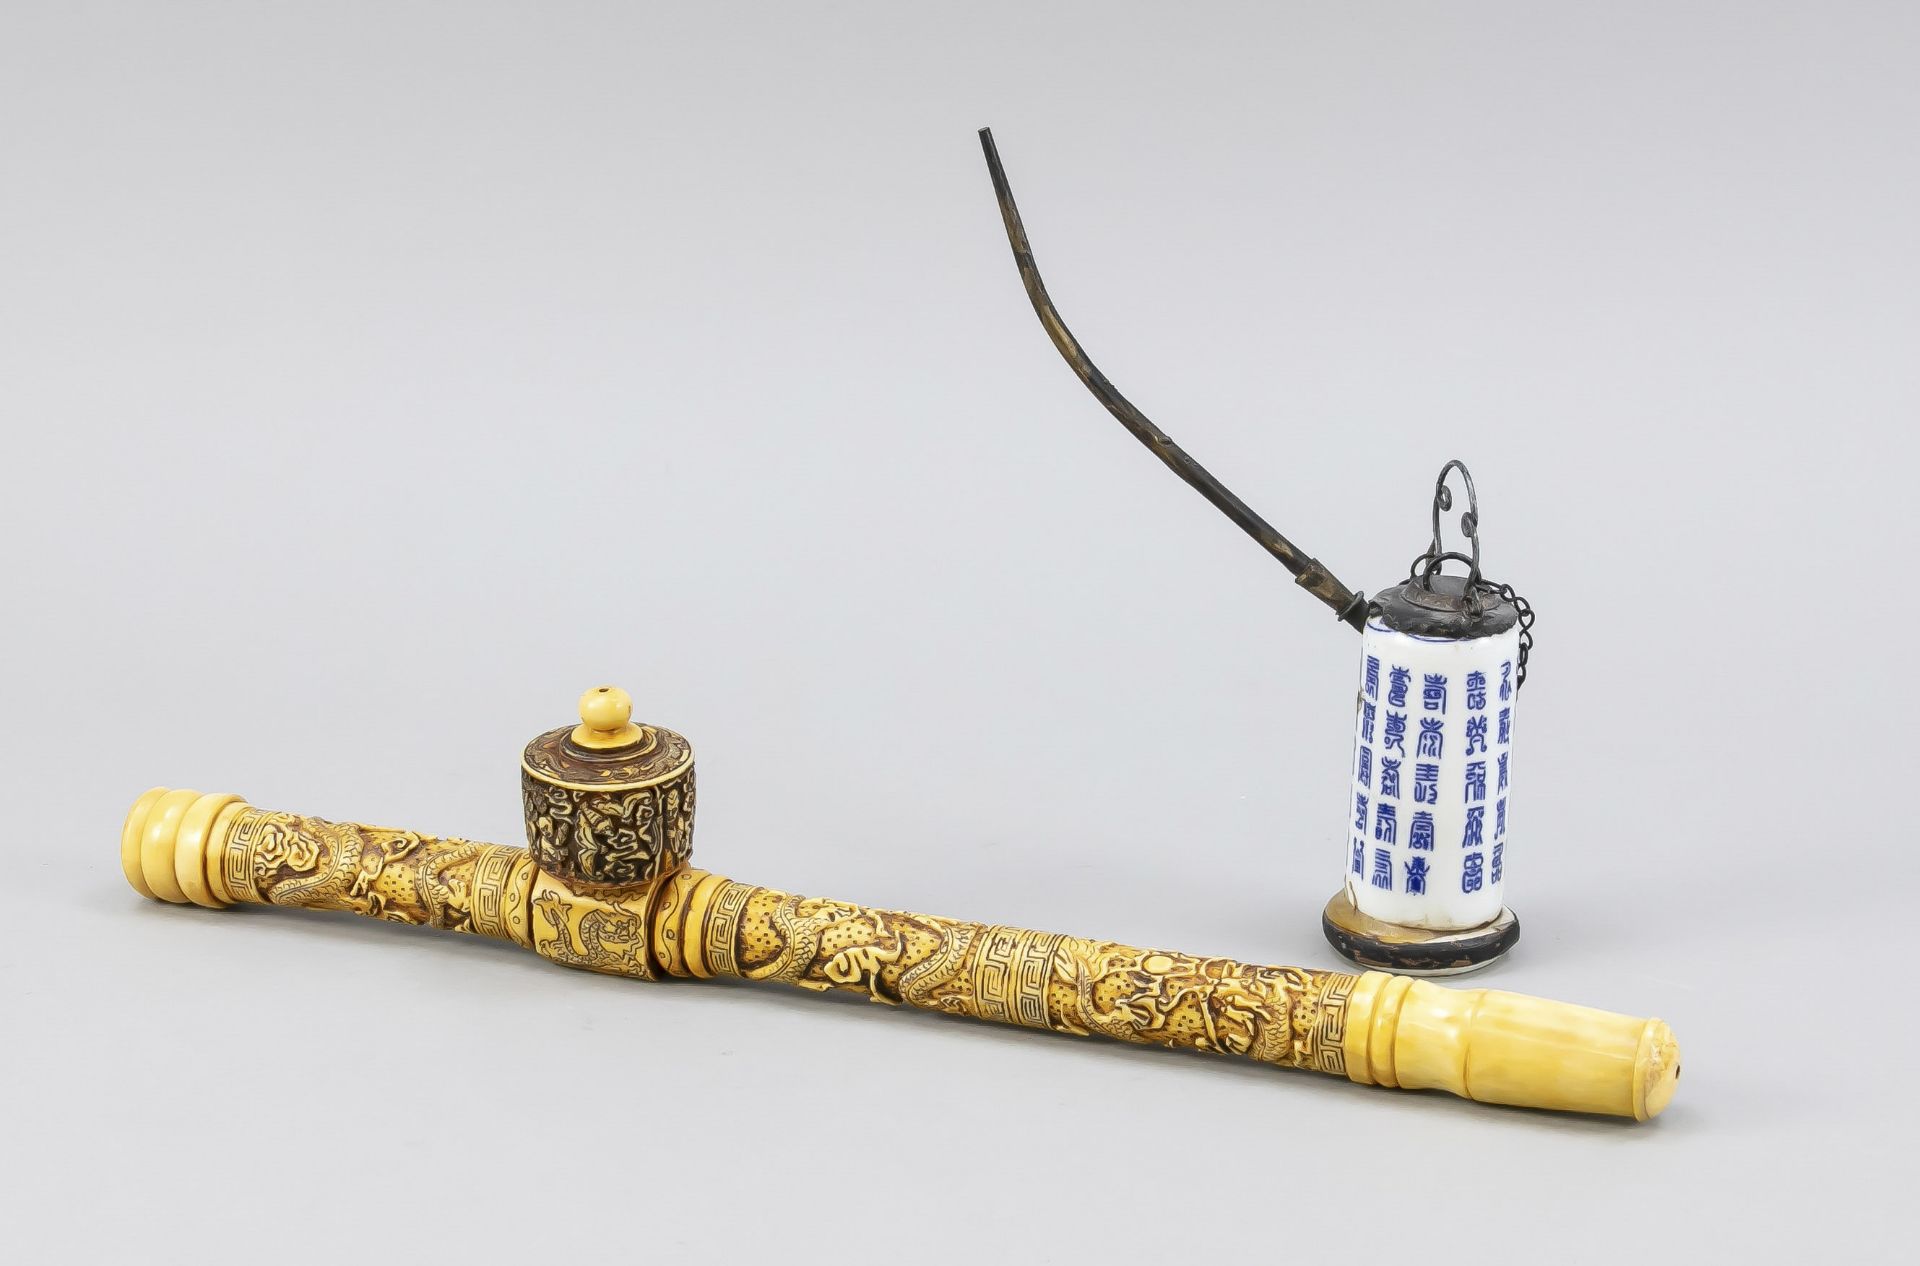 2 opium pipes, China, 19th/20th c. 1 x carved bone (l. 38 cm), 1 x porcelain with cobalt blue